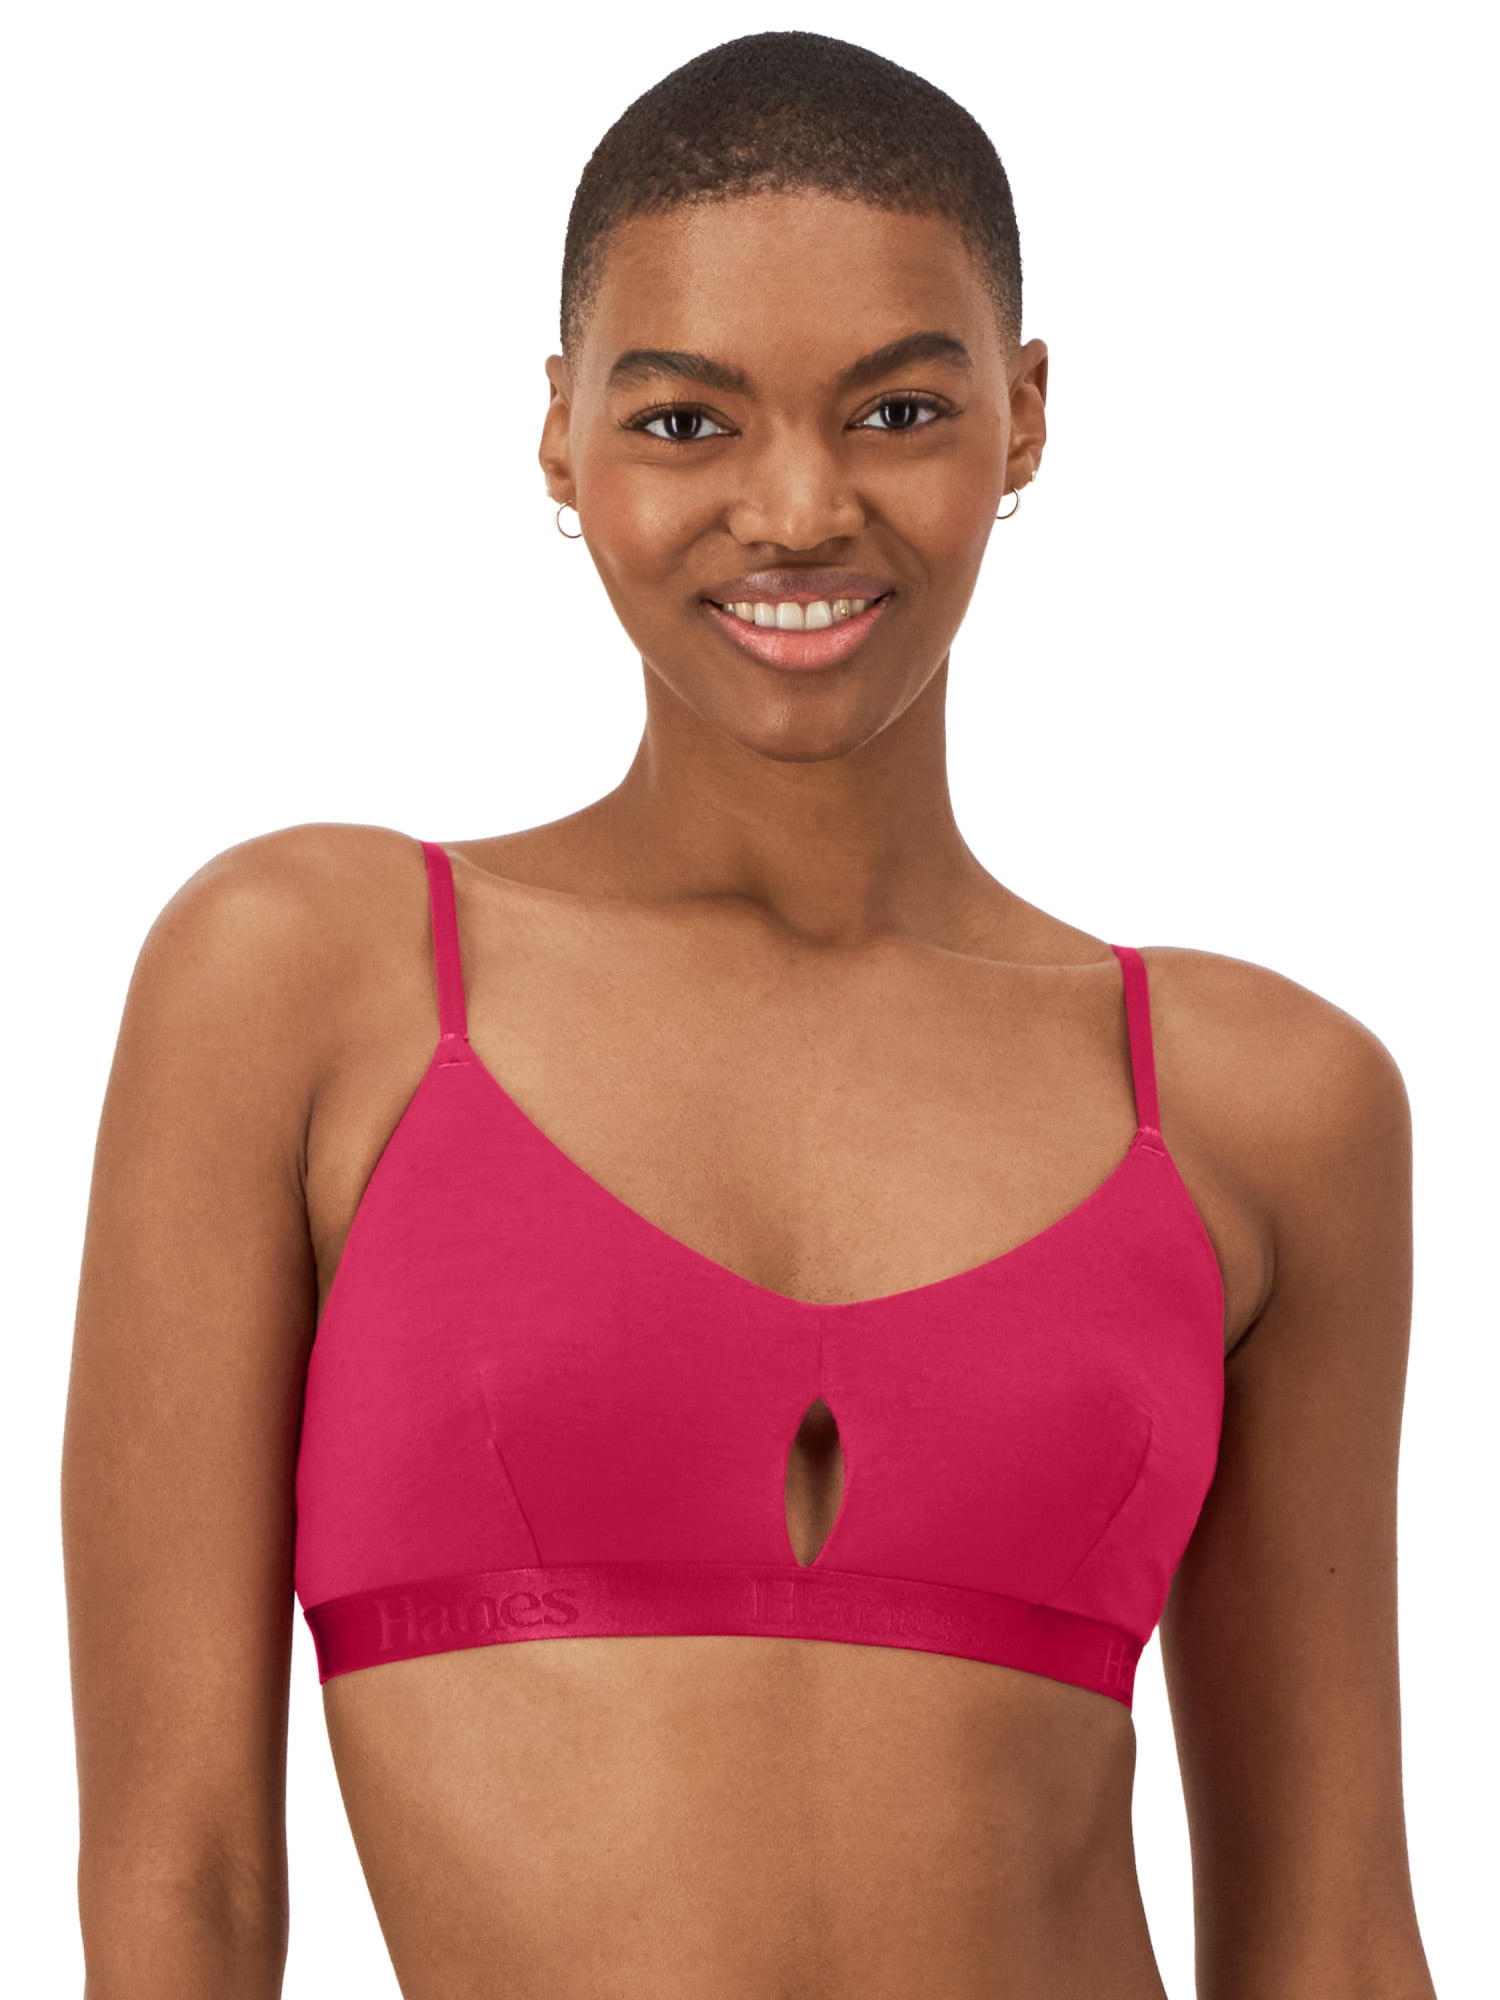 Concealing Petals Wirefree Bra, Style G510 